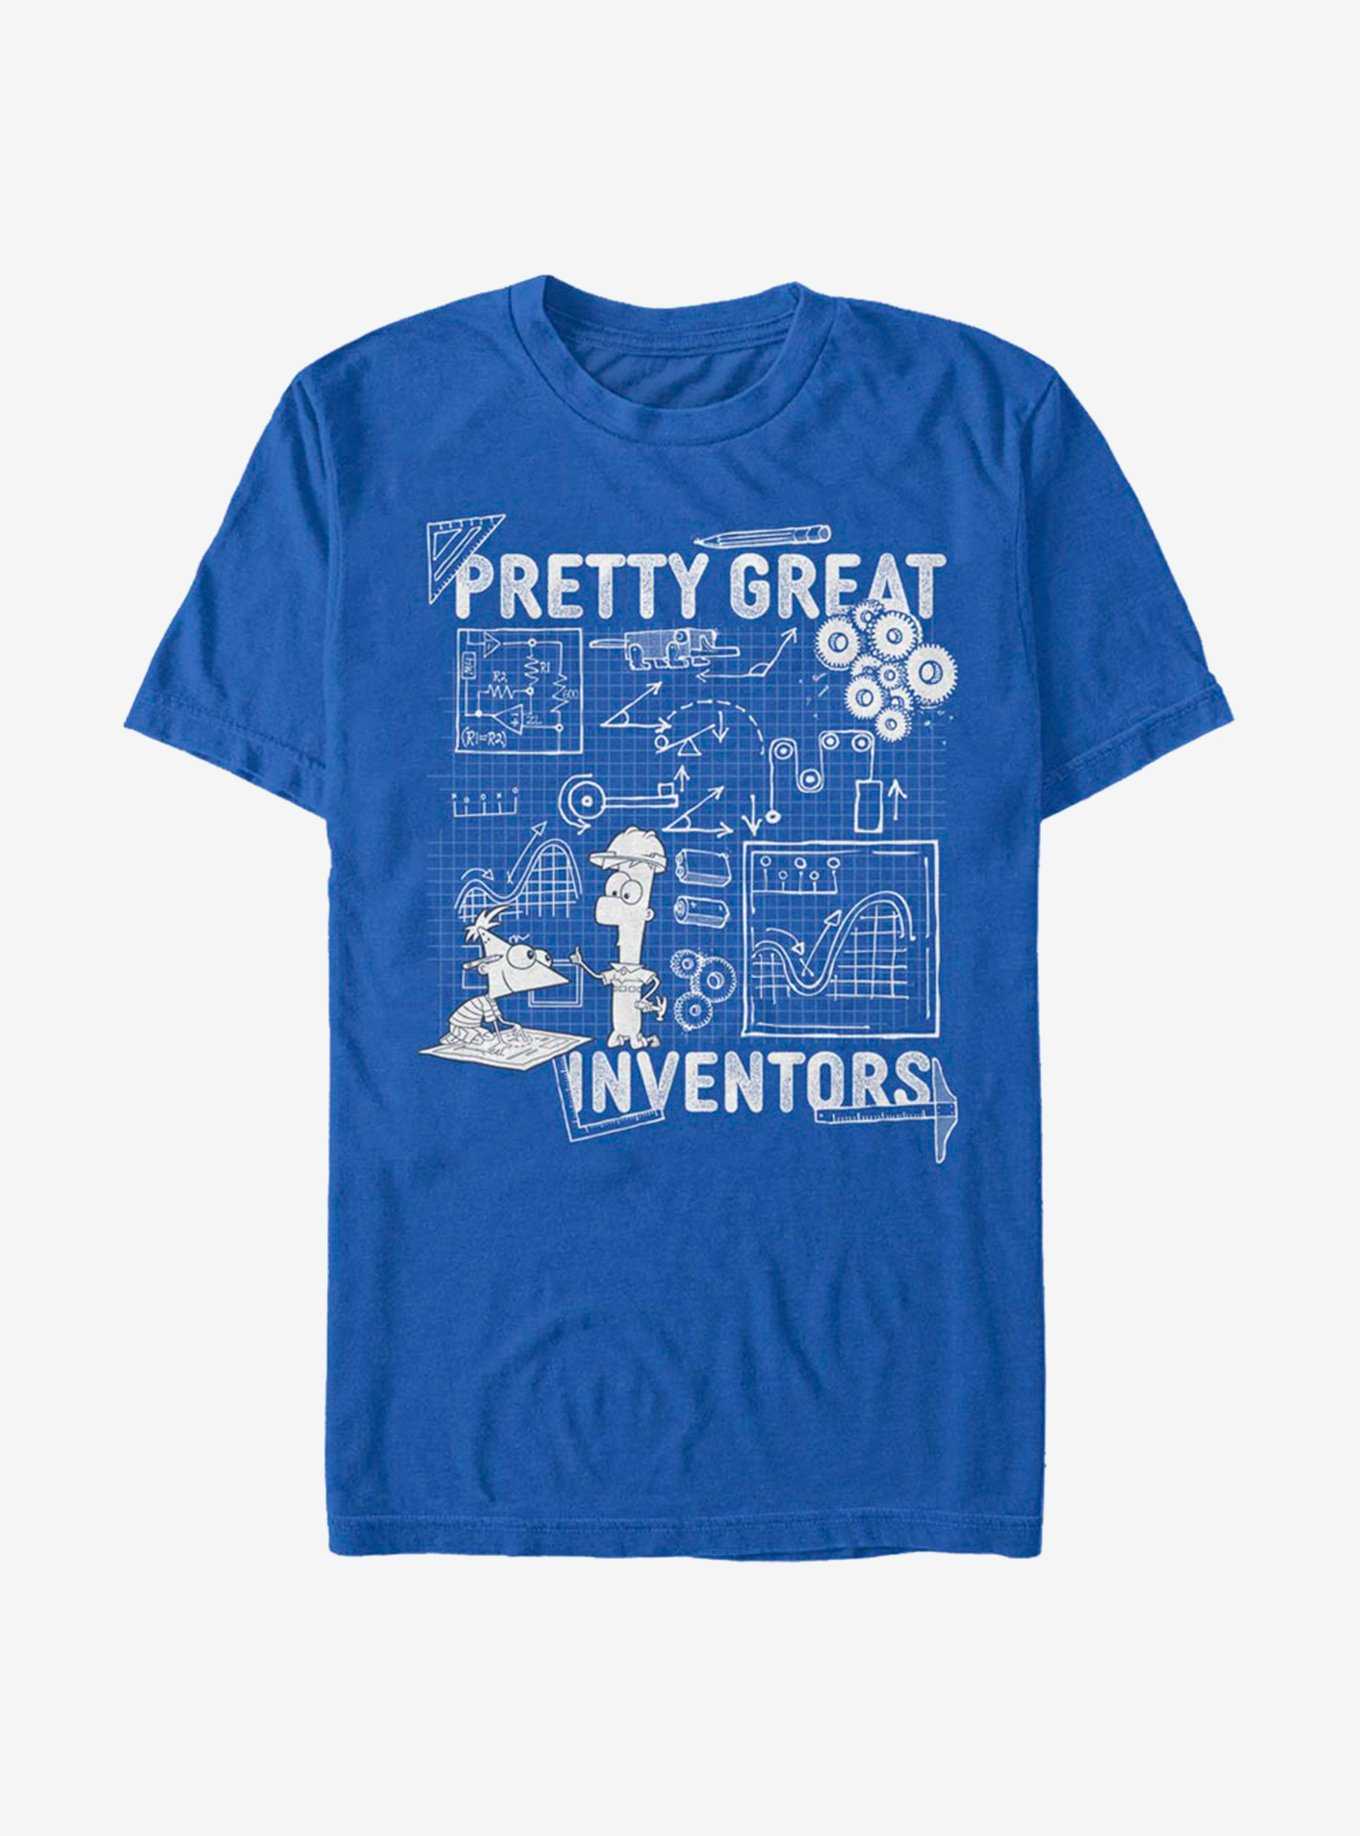 Disney Phineas And Ferb Really Great Inventors T-Shirt, , hi-res